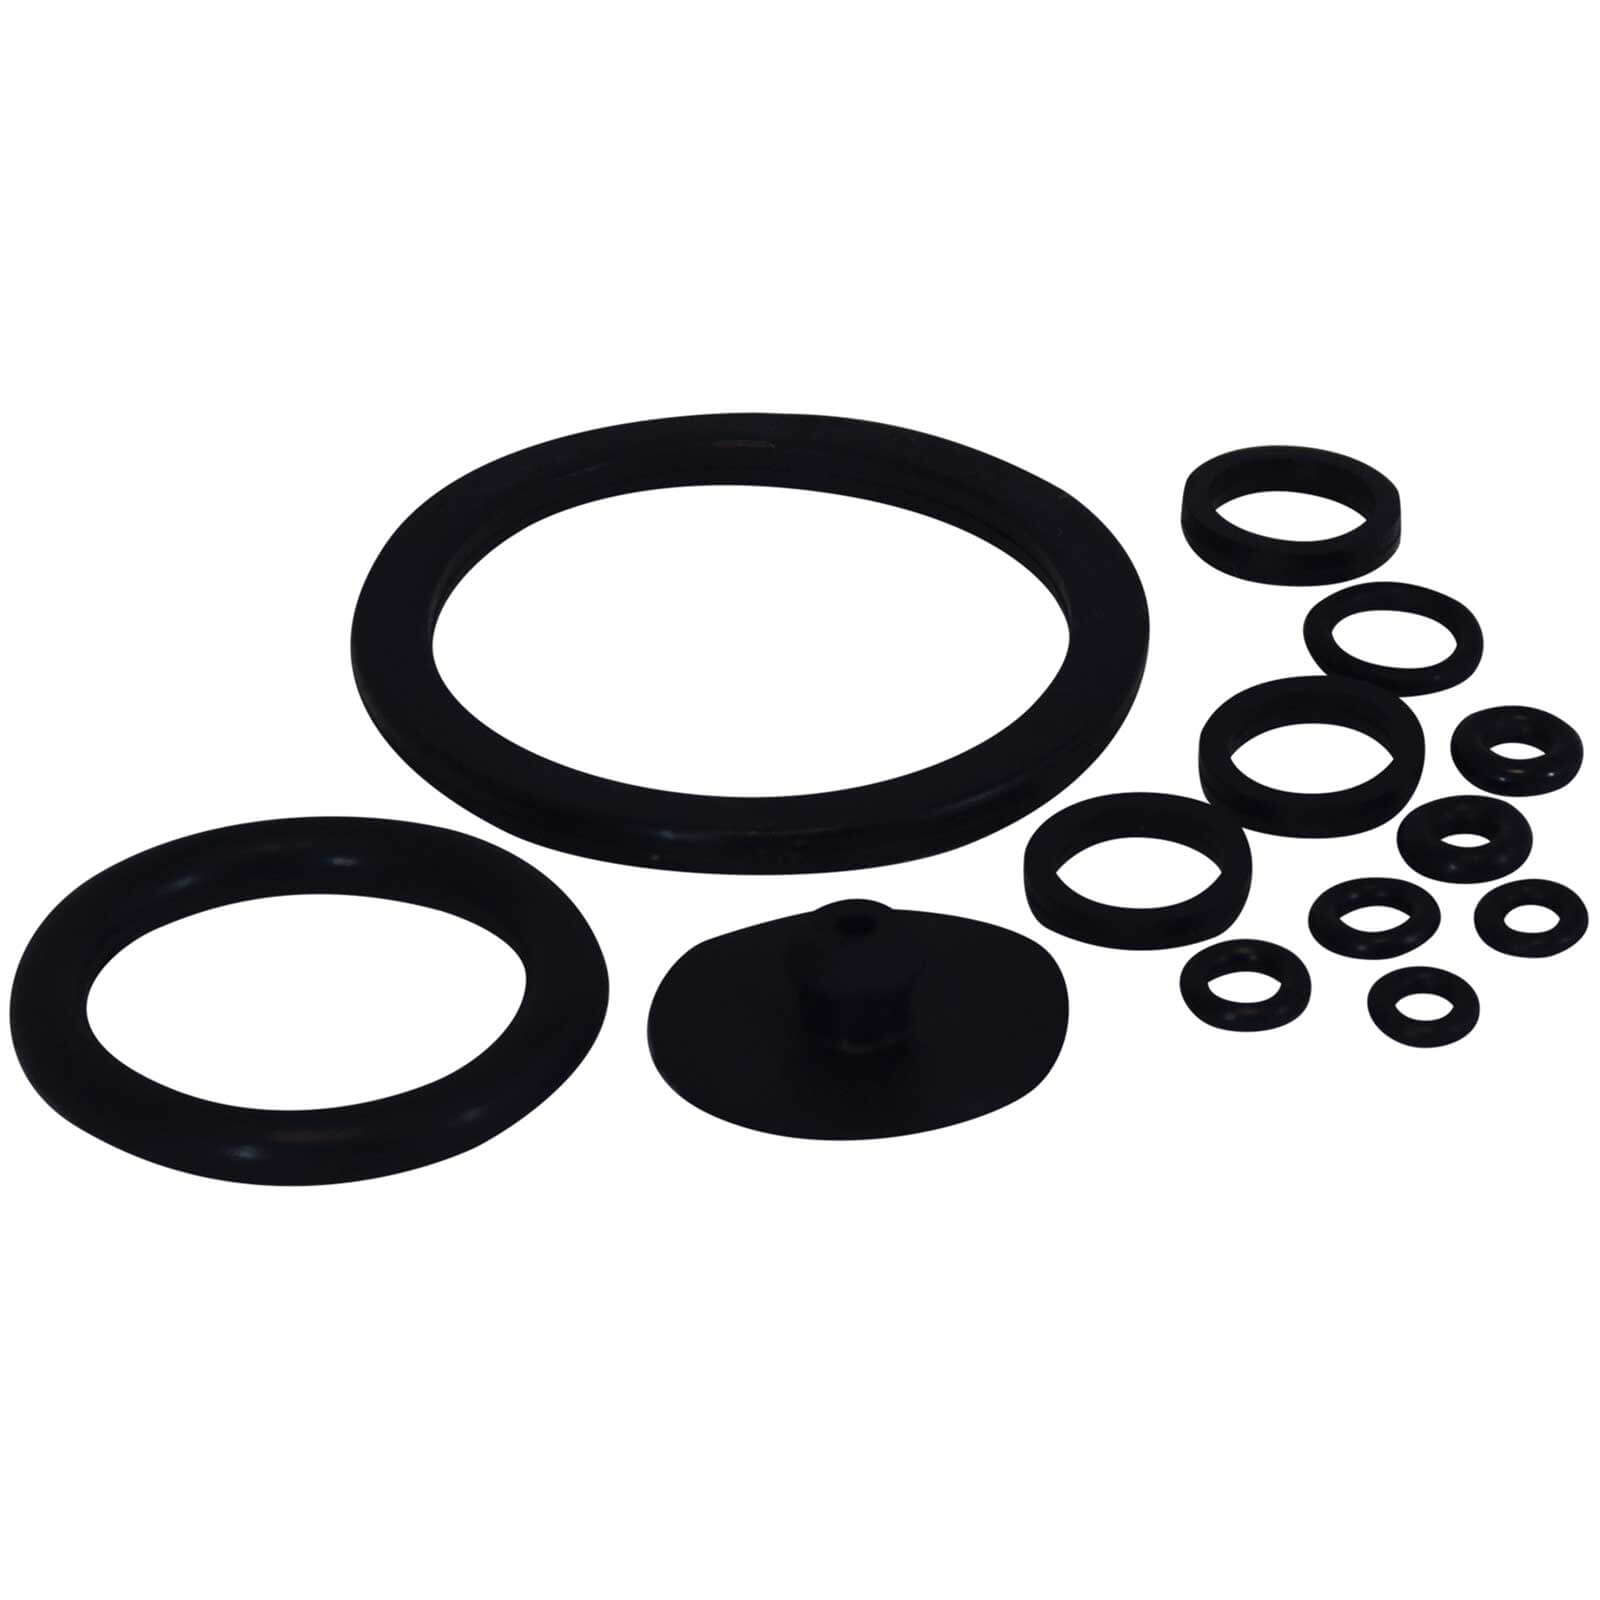 Spear and Jackson Replacement O Rings for 5l Chemical Pressure Sprayers